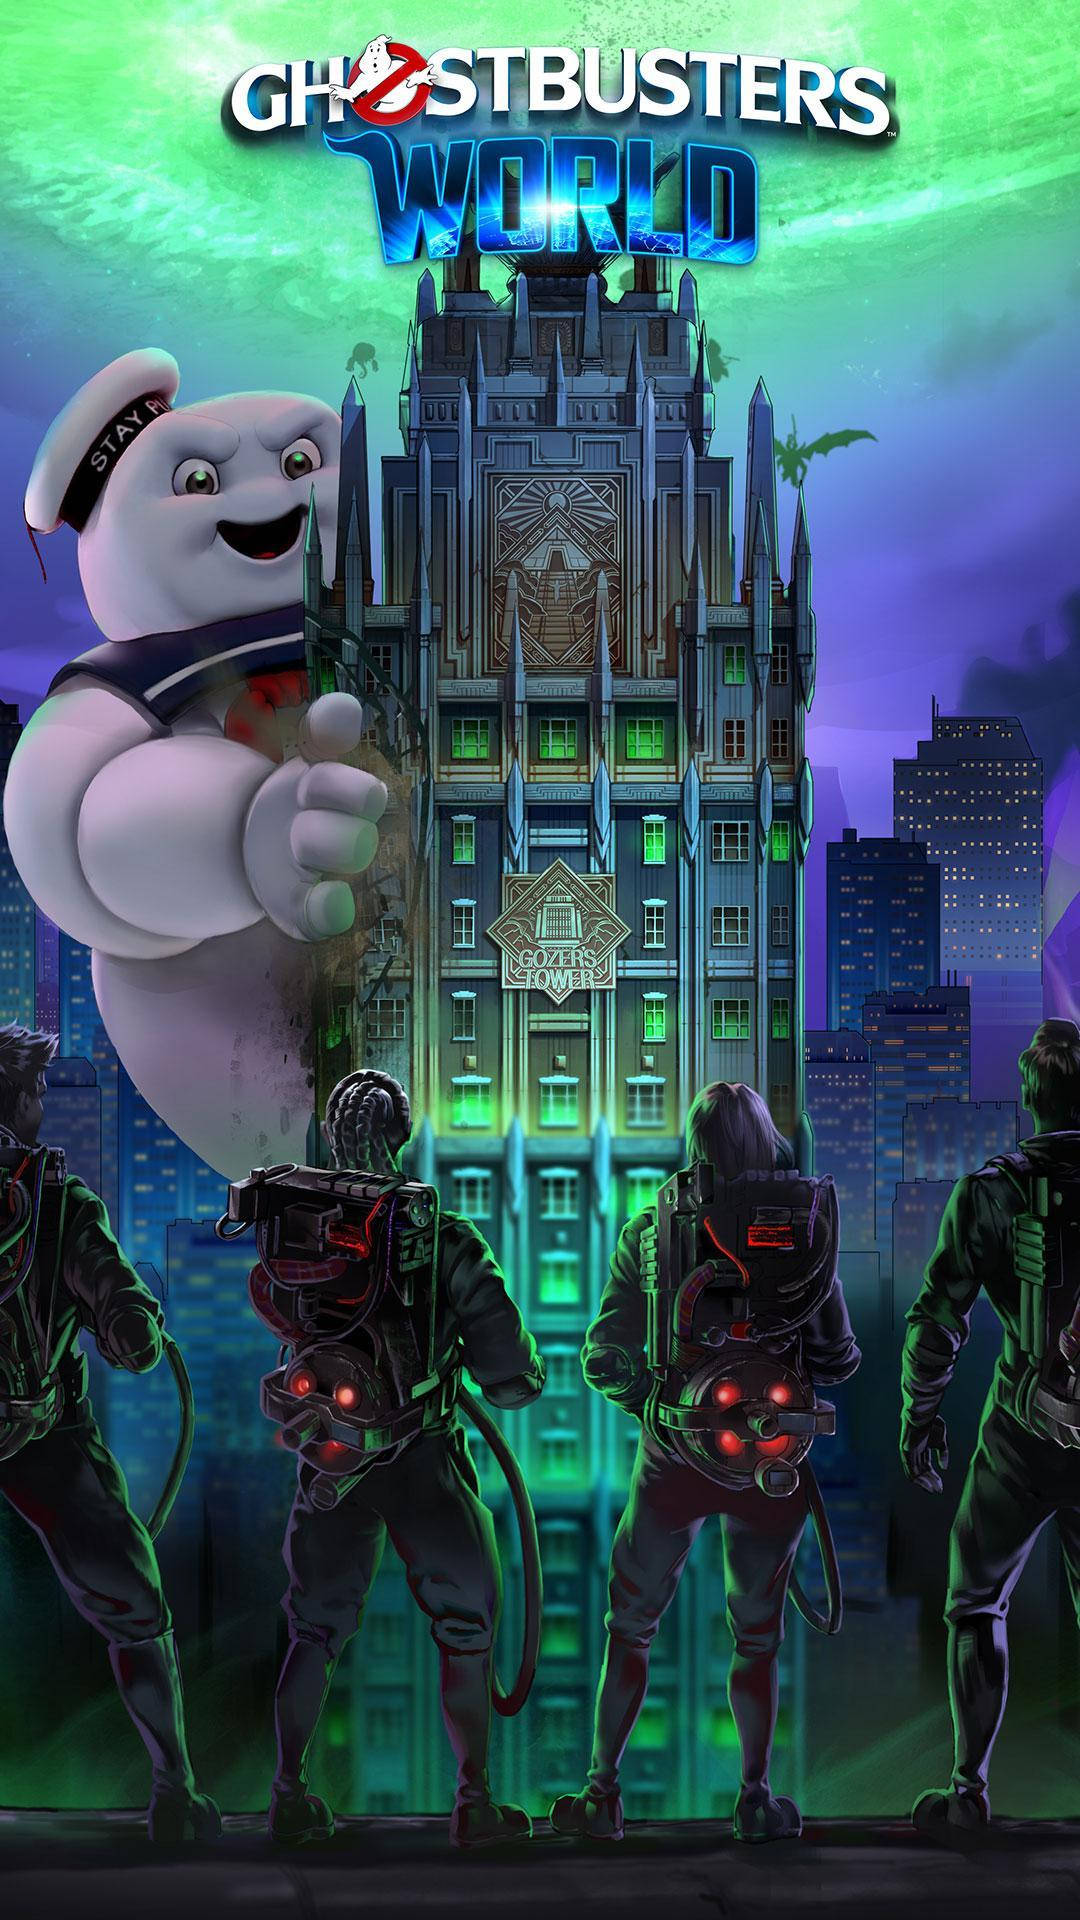 'be Ready - Ghostbusters Are Here!' Background